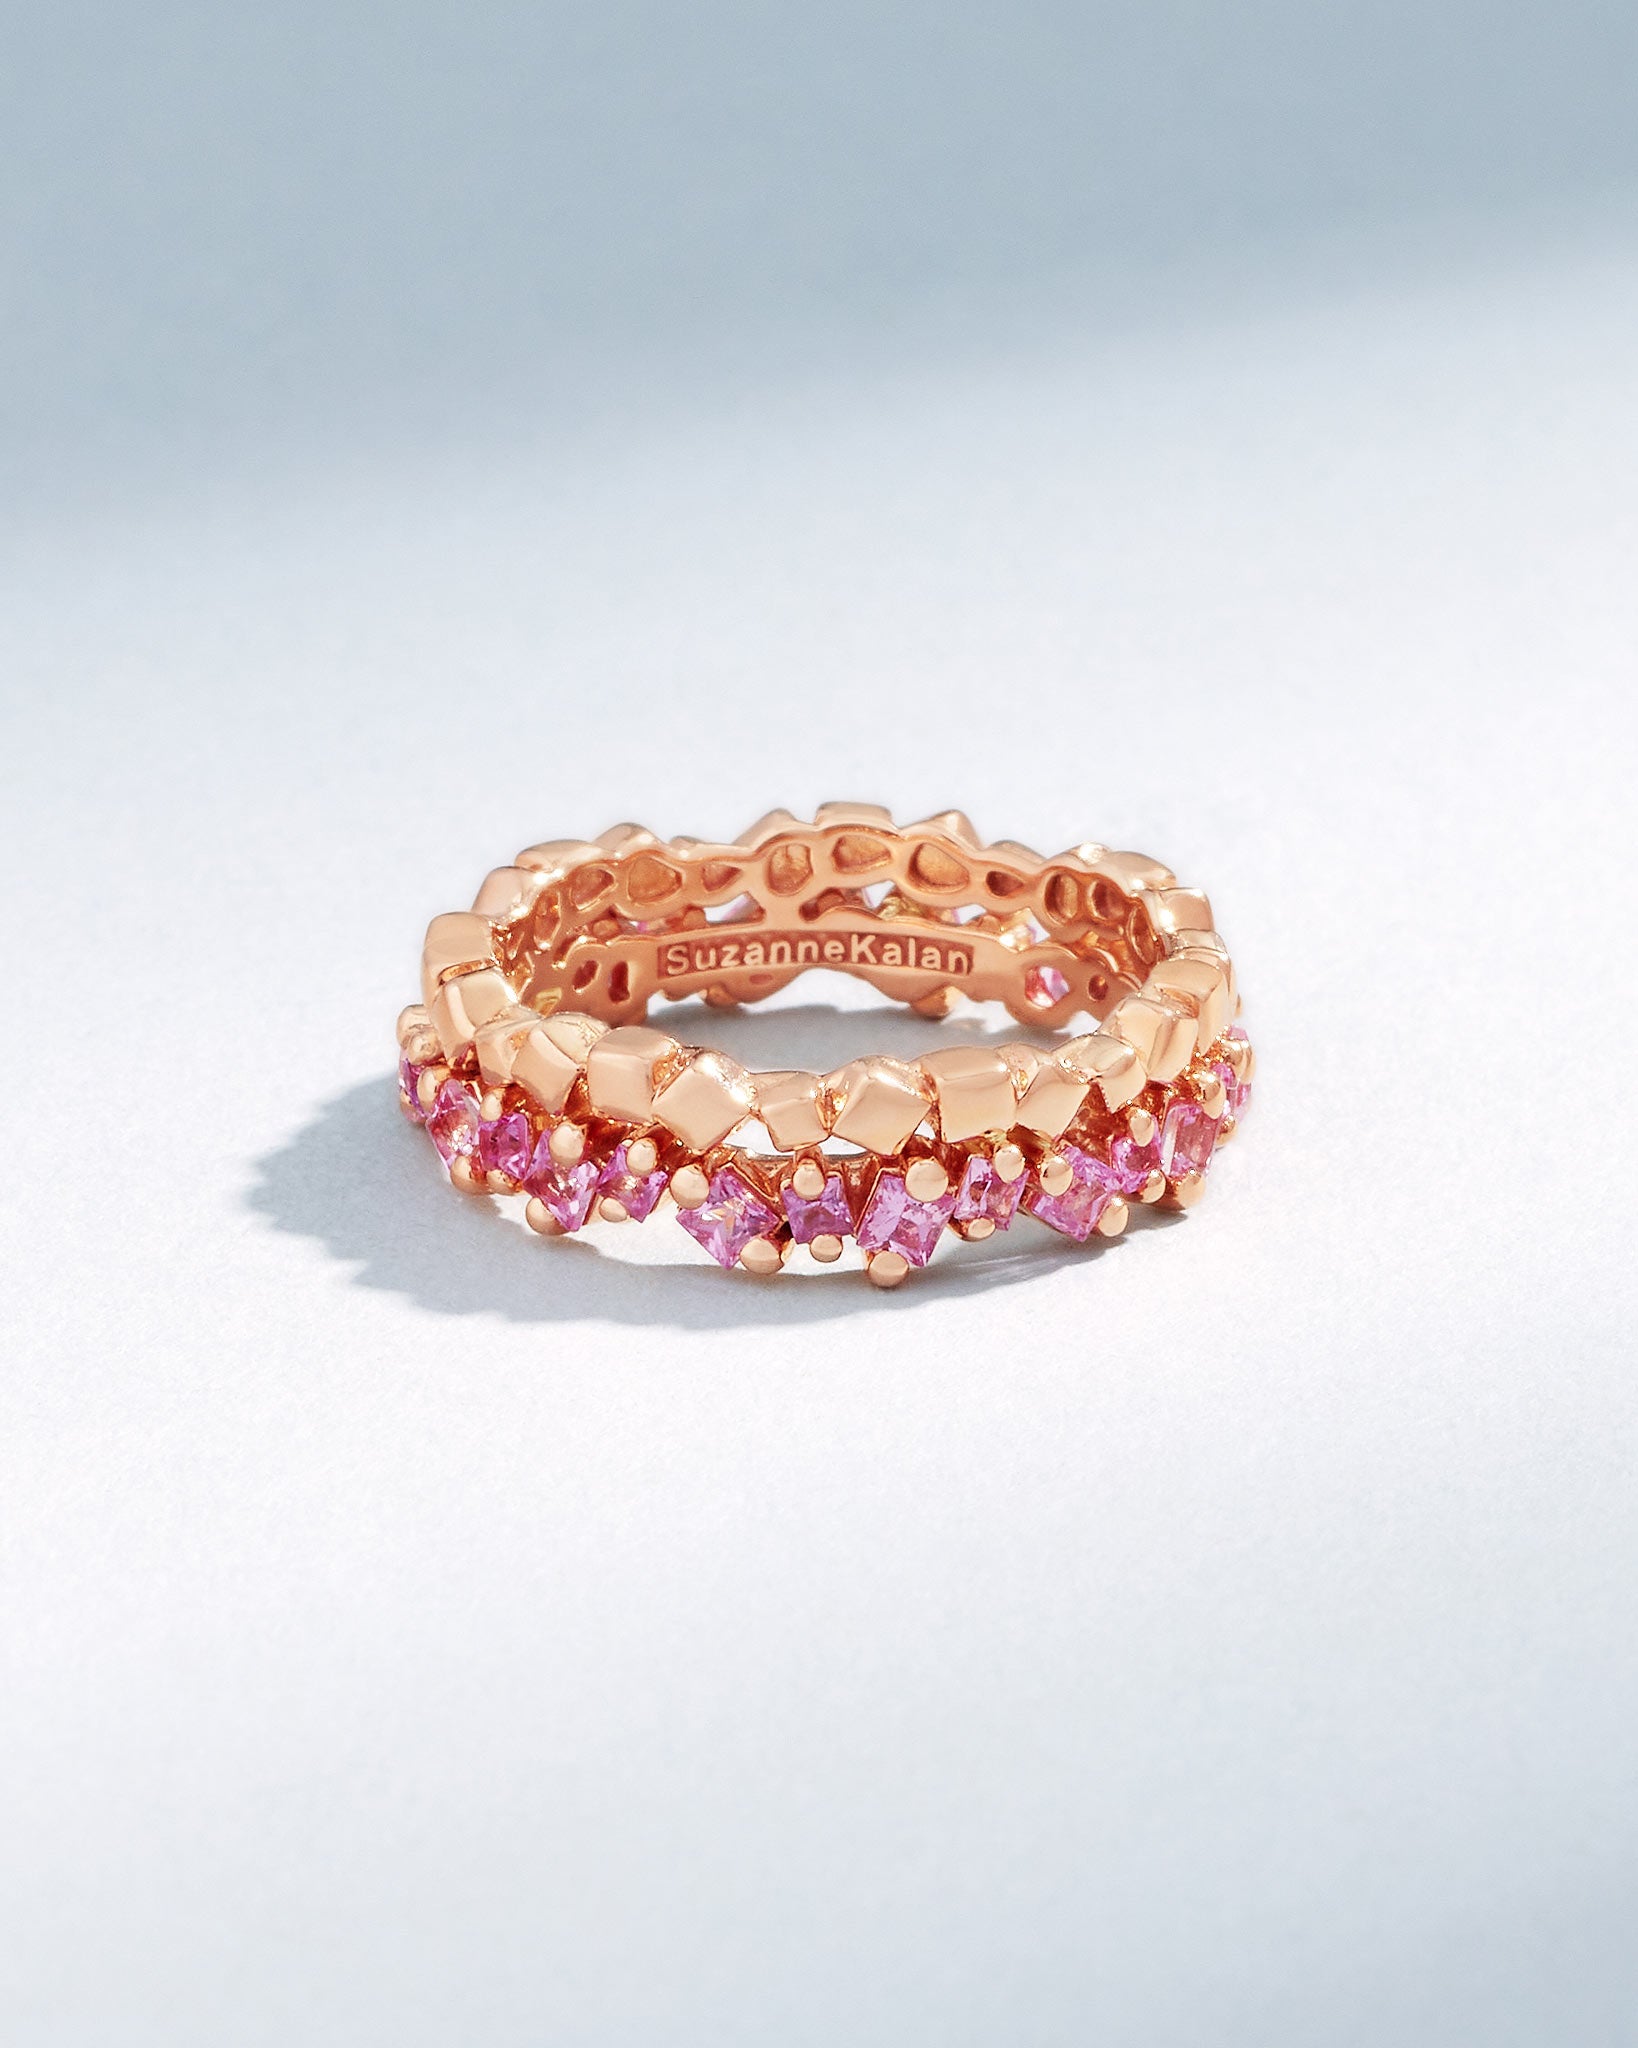 Suzanne Kalan Golden Mini Pink Sapphire Eternity Band in 18k rose gold